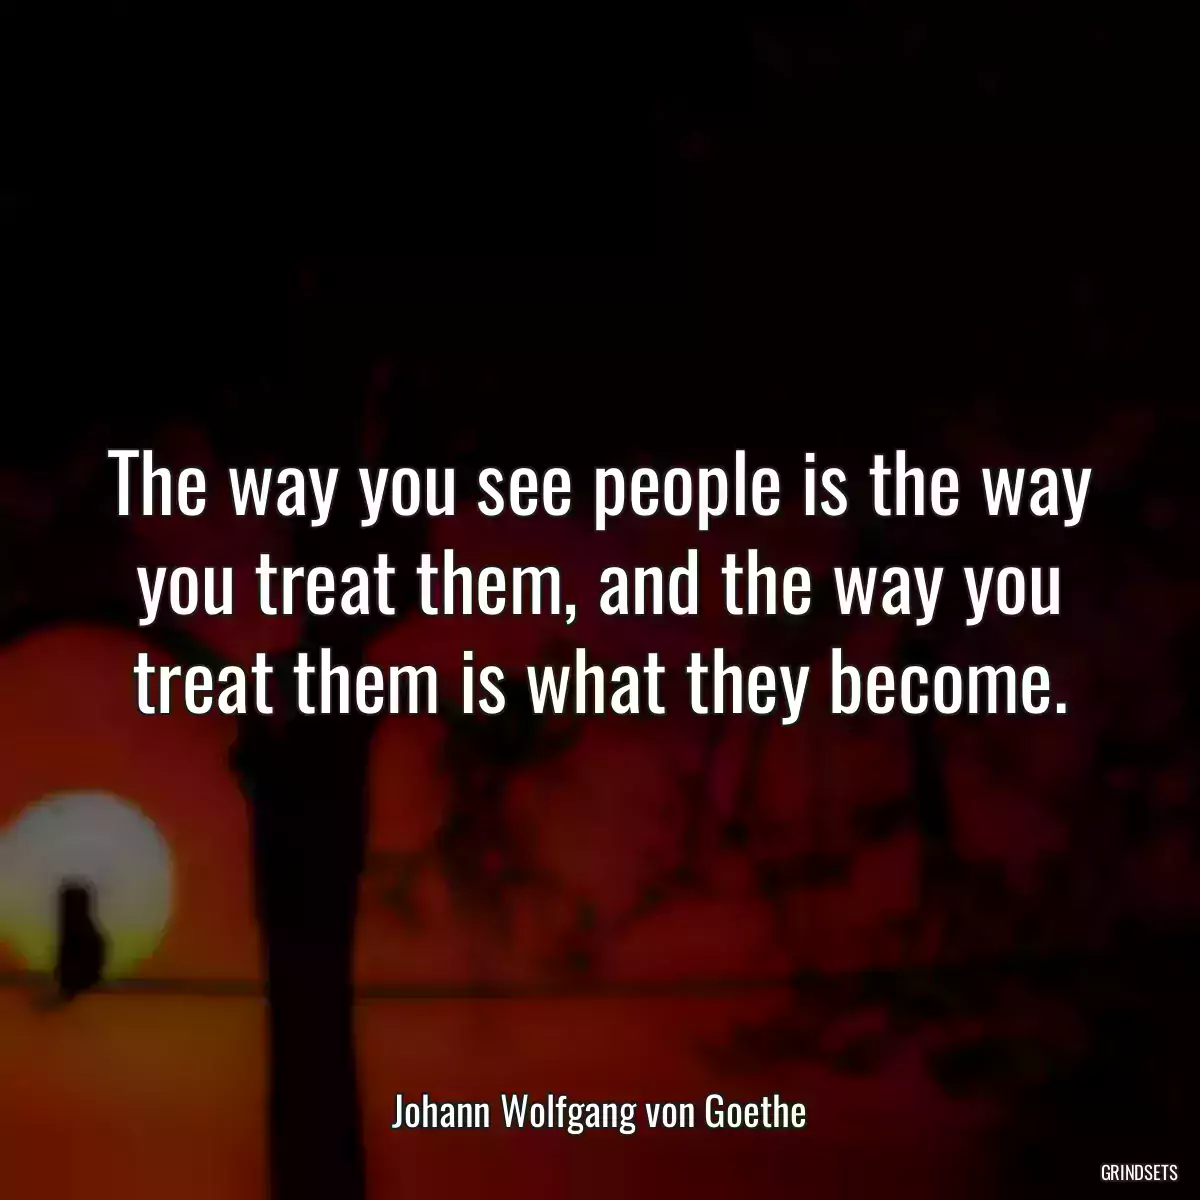 The way you see people is the way you treat them, and the way you treat them is what they become.